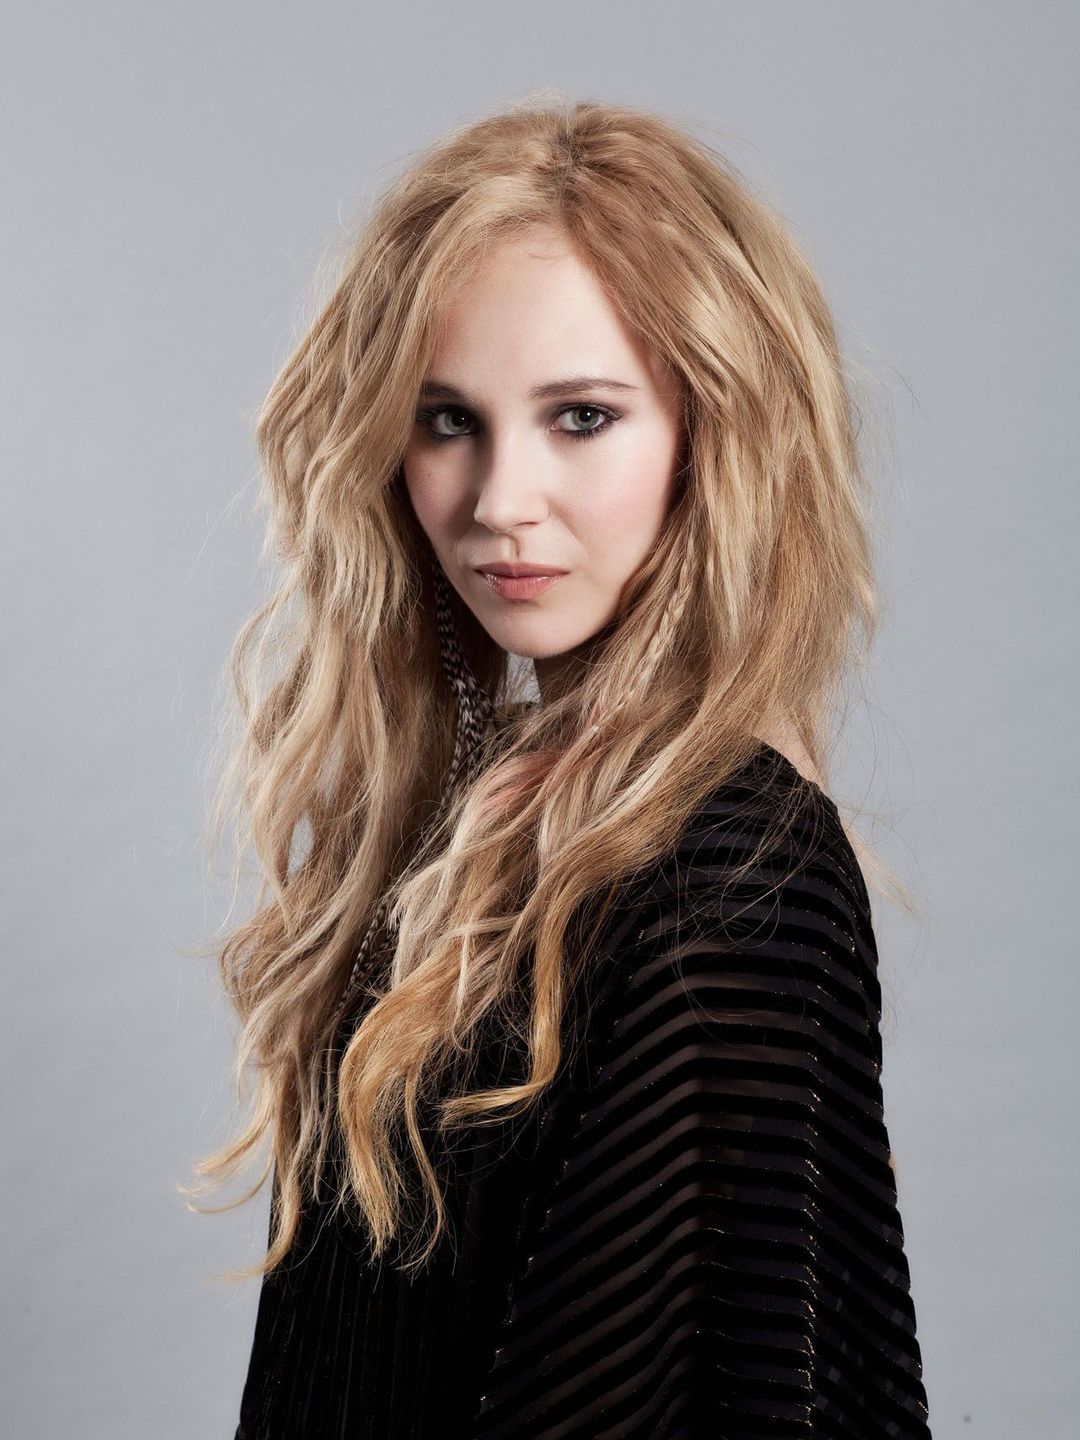 Juno Temple interesting facts